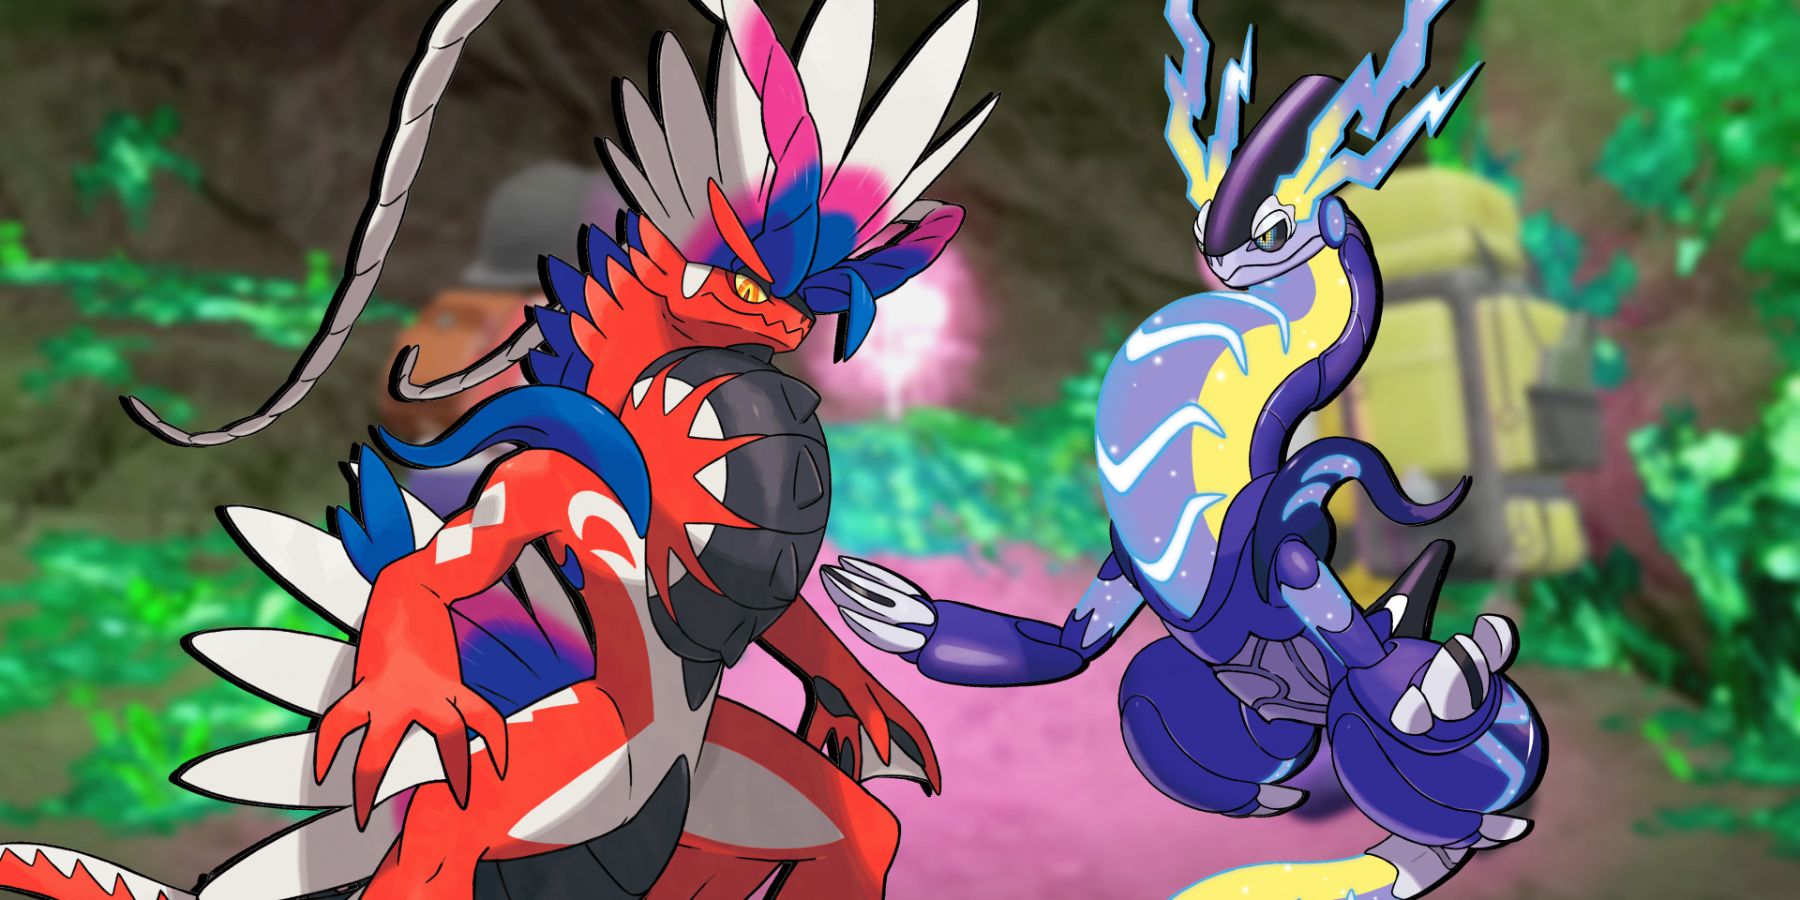 A fusion between the two new legendary pokemon - Koraidon and